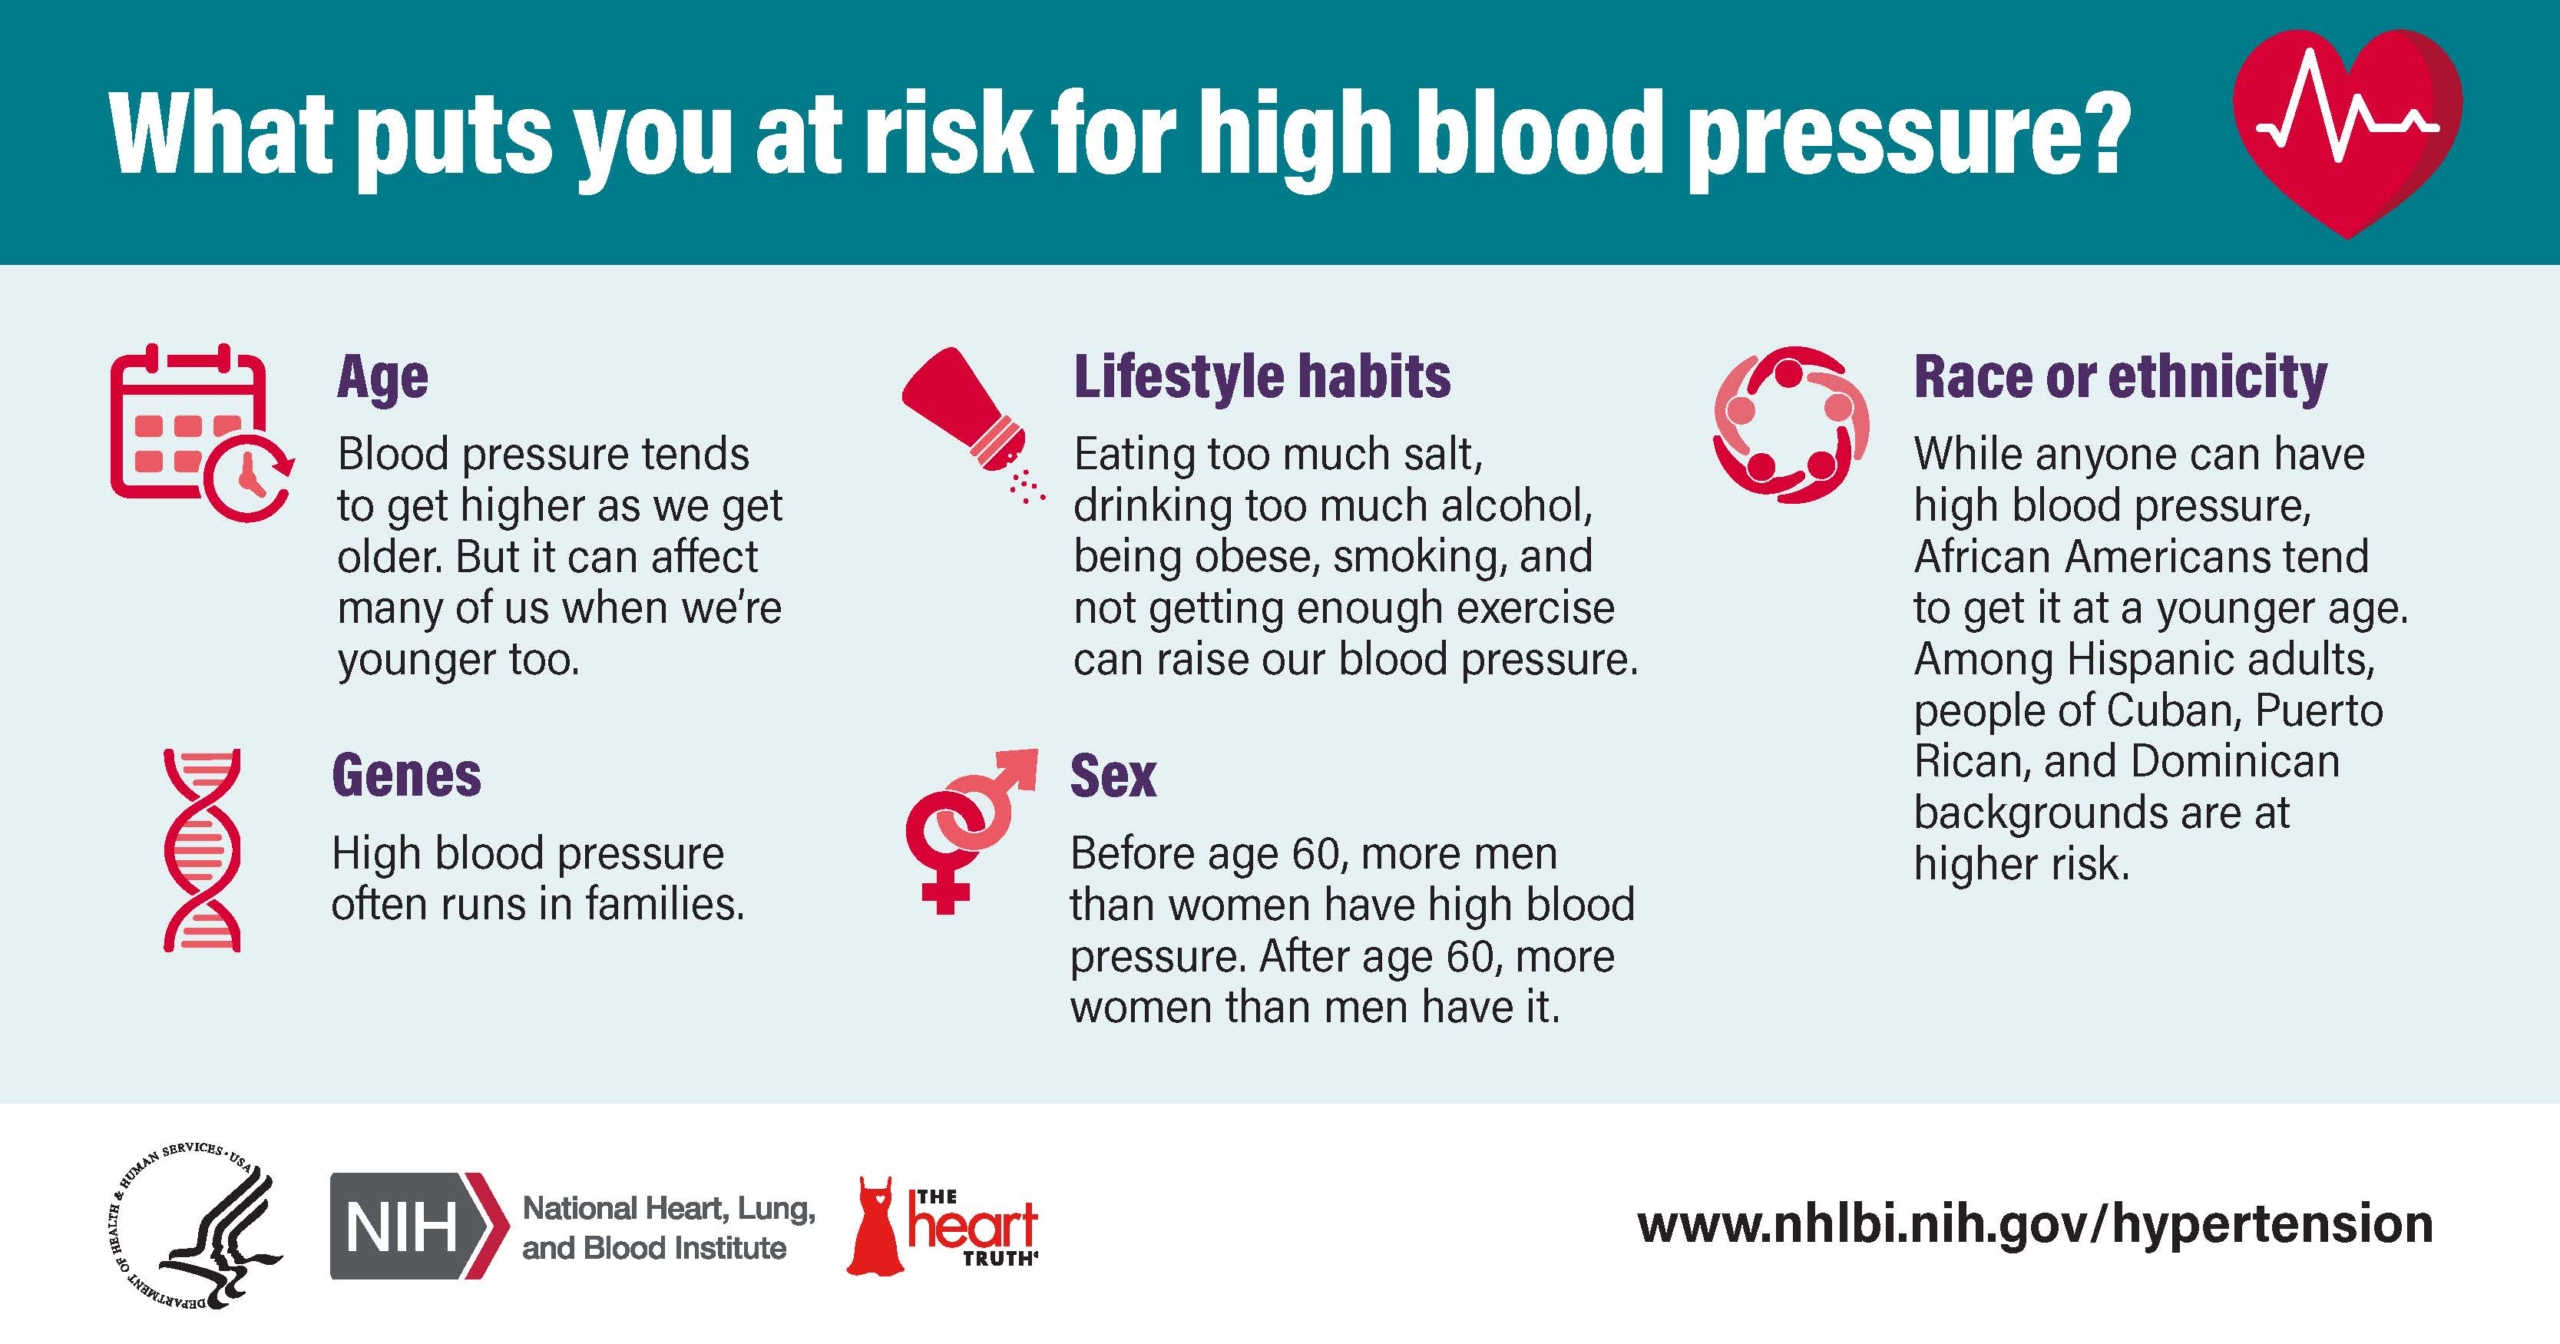 Menopause and High Blood Pressure